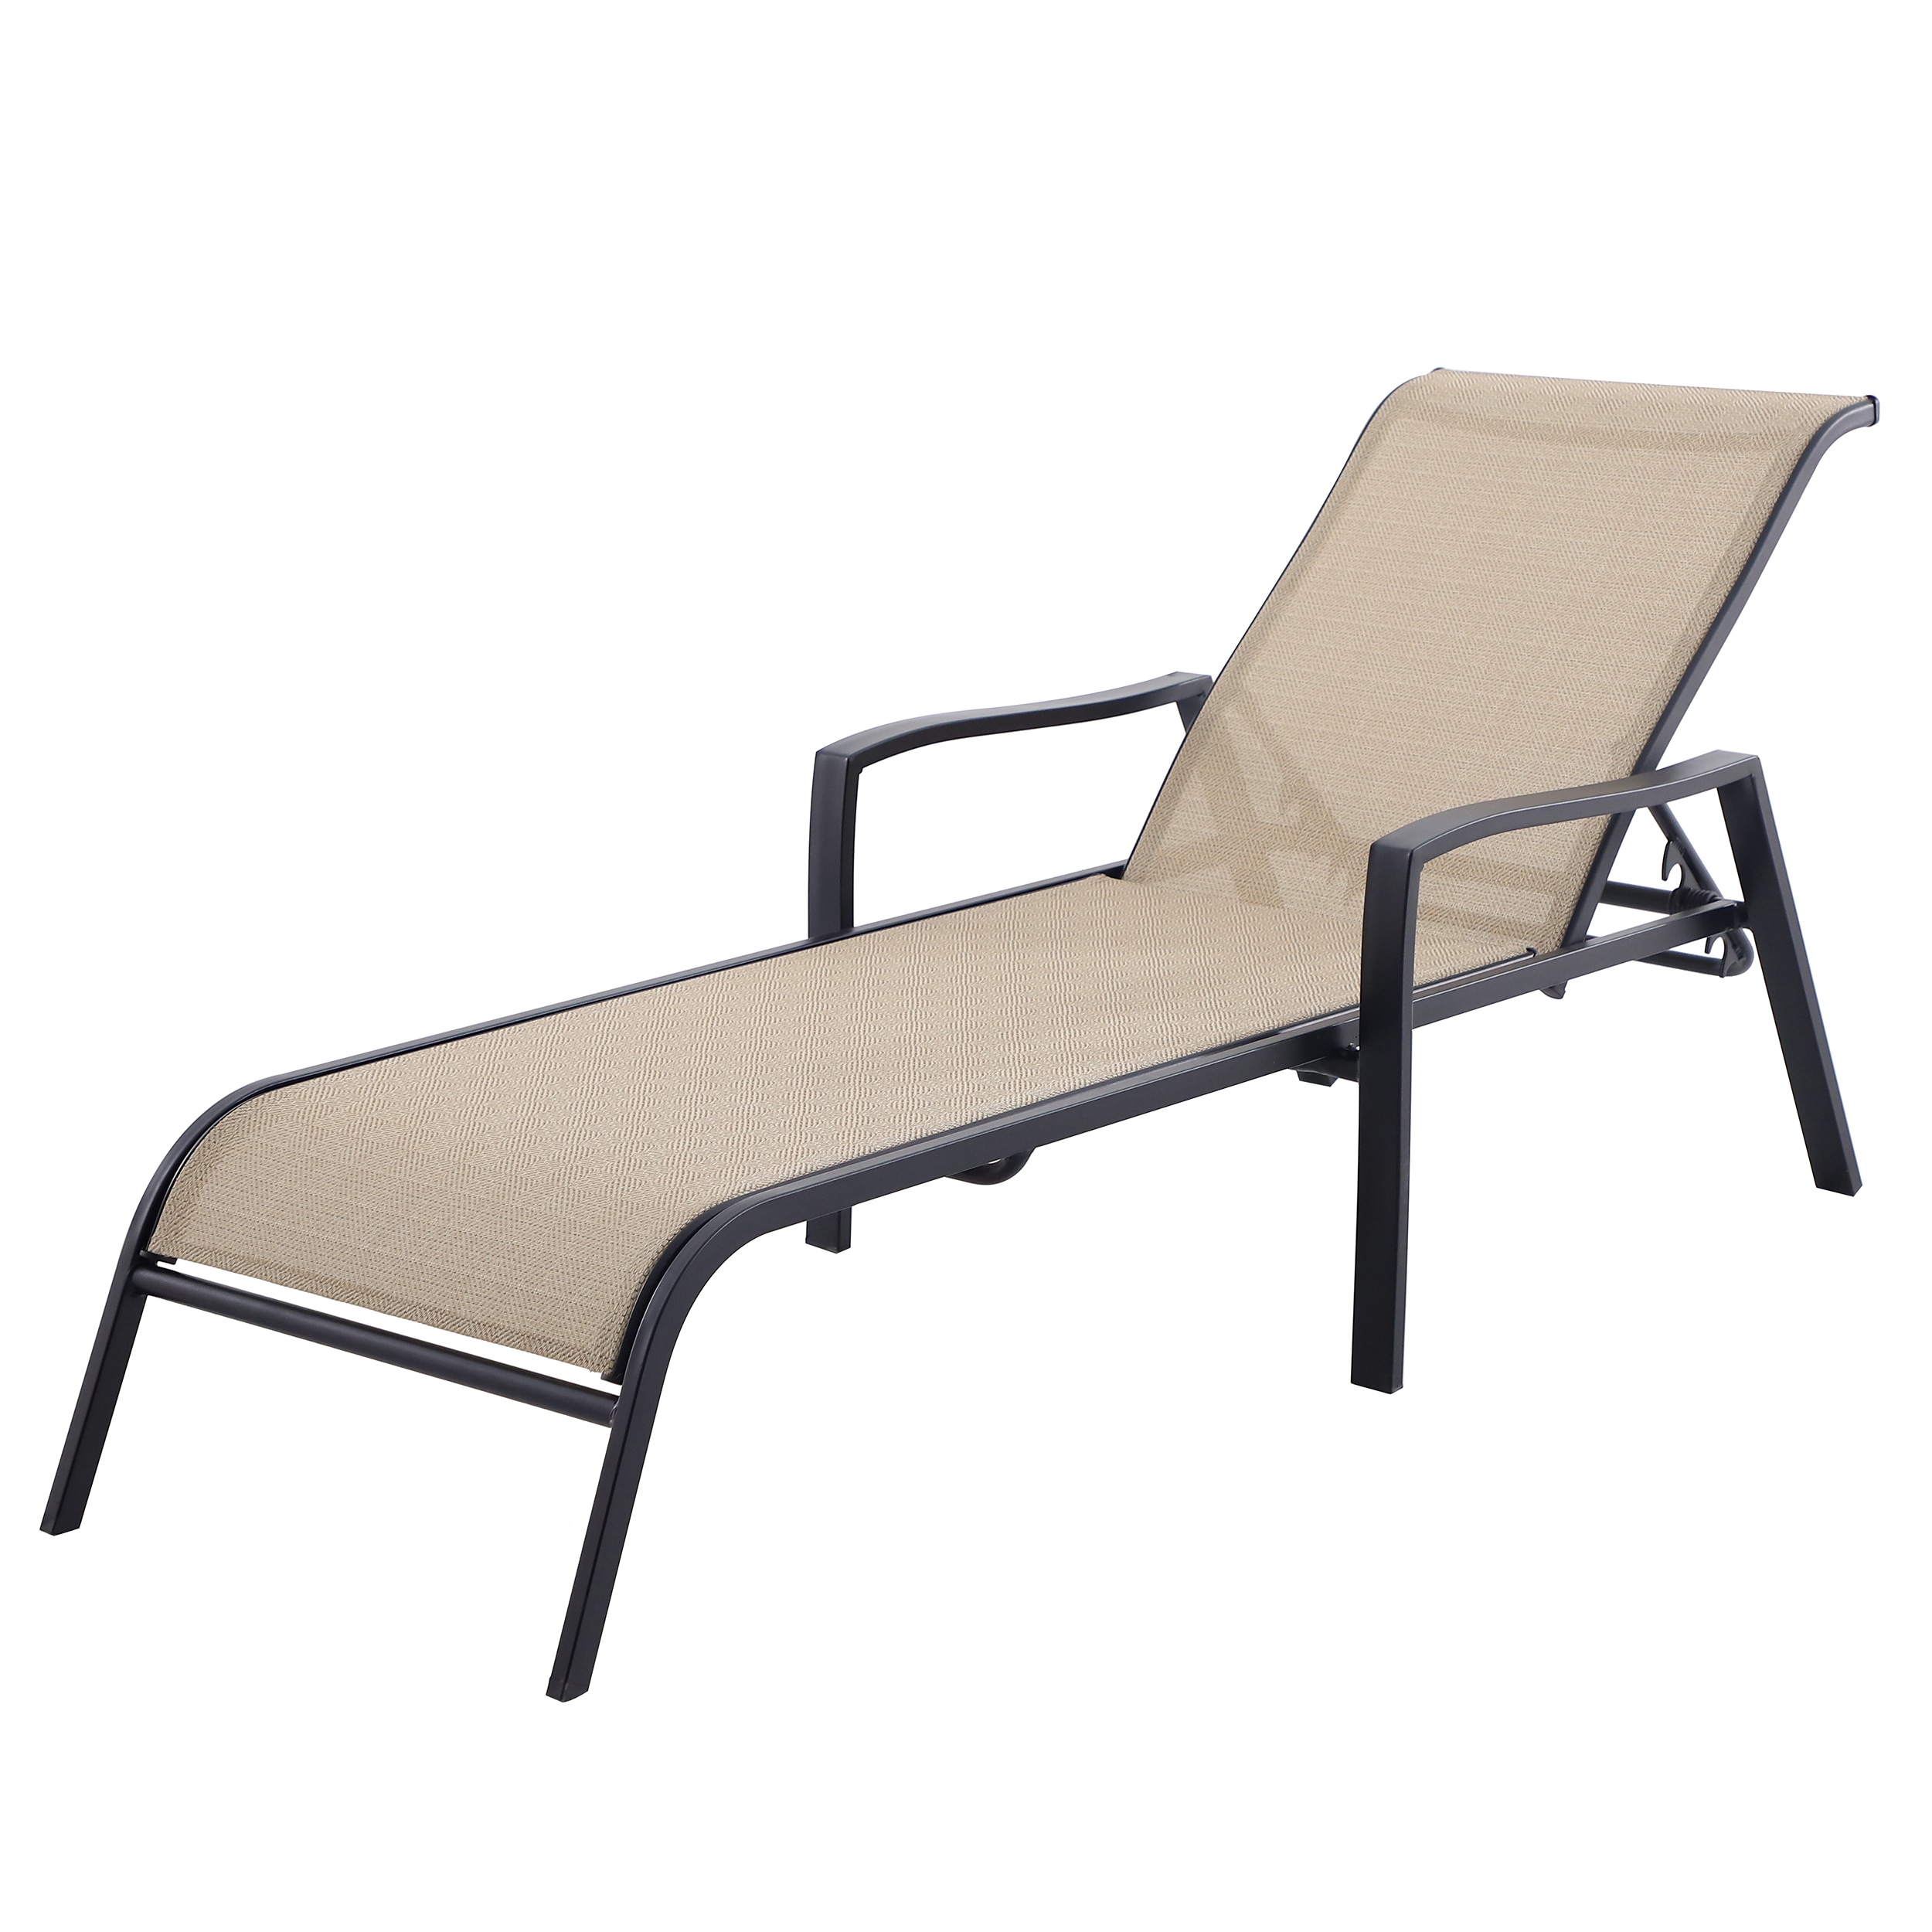 Pelham Bay Stackable Black Steel Frame Stationary Chaise Lounge Chair(s) with Tan Sling Seat | - Style Selections FLS70325-A